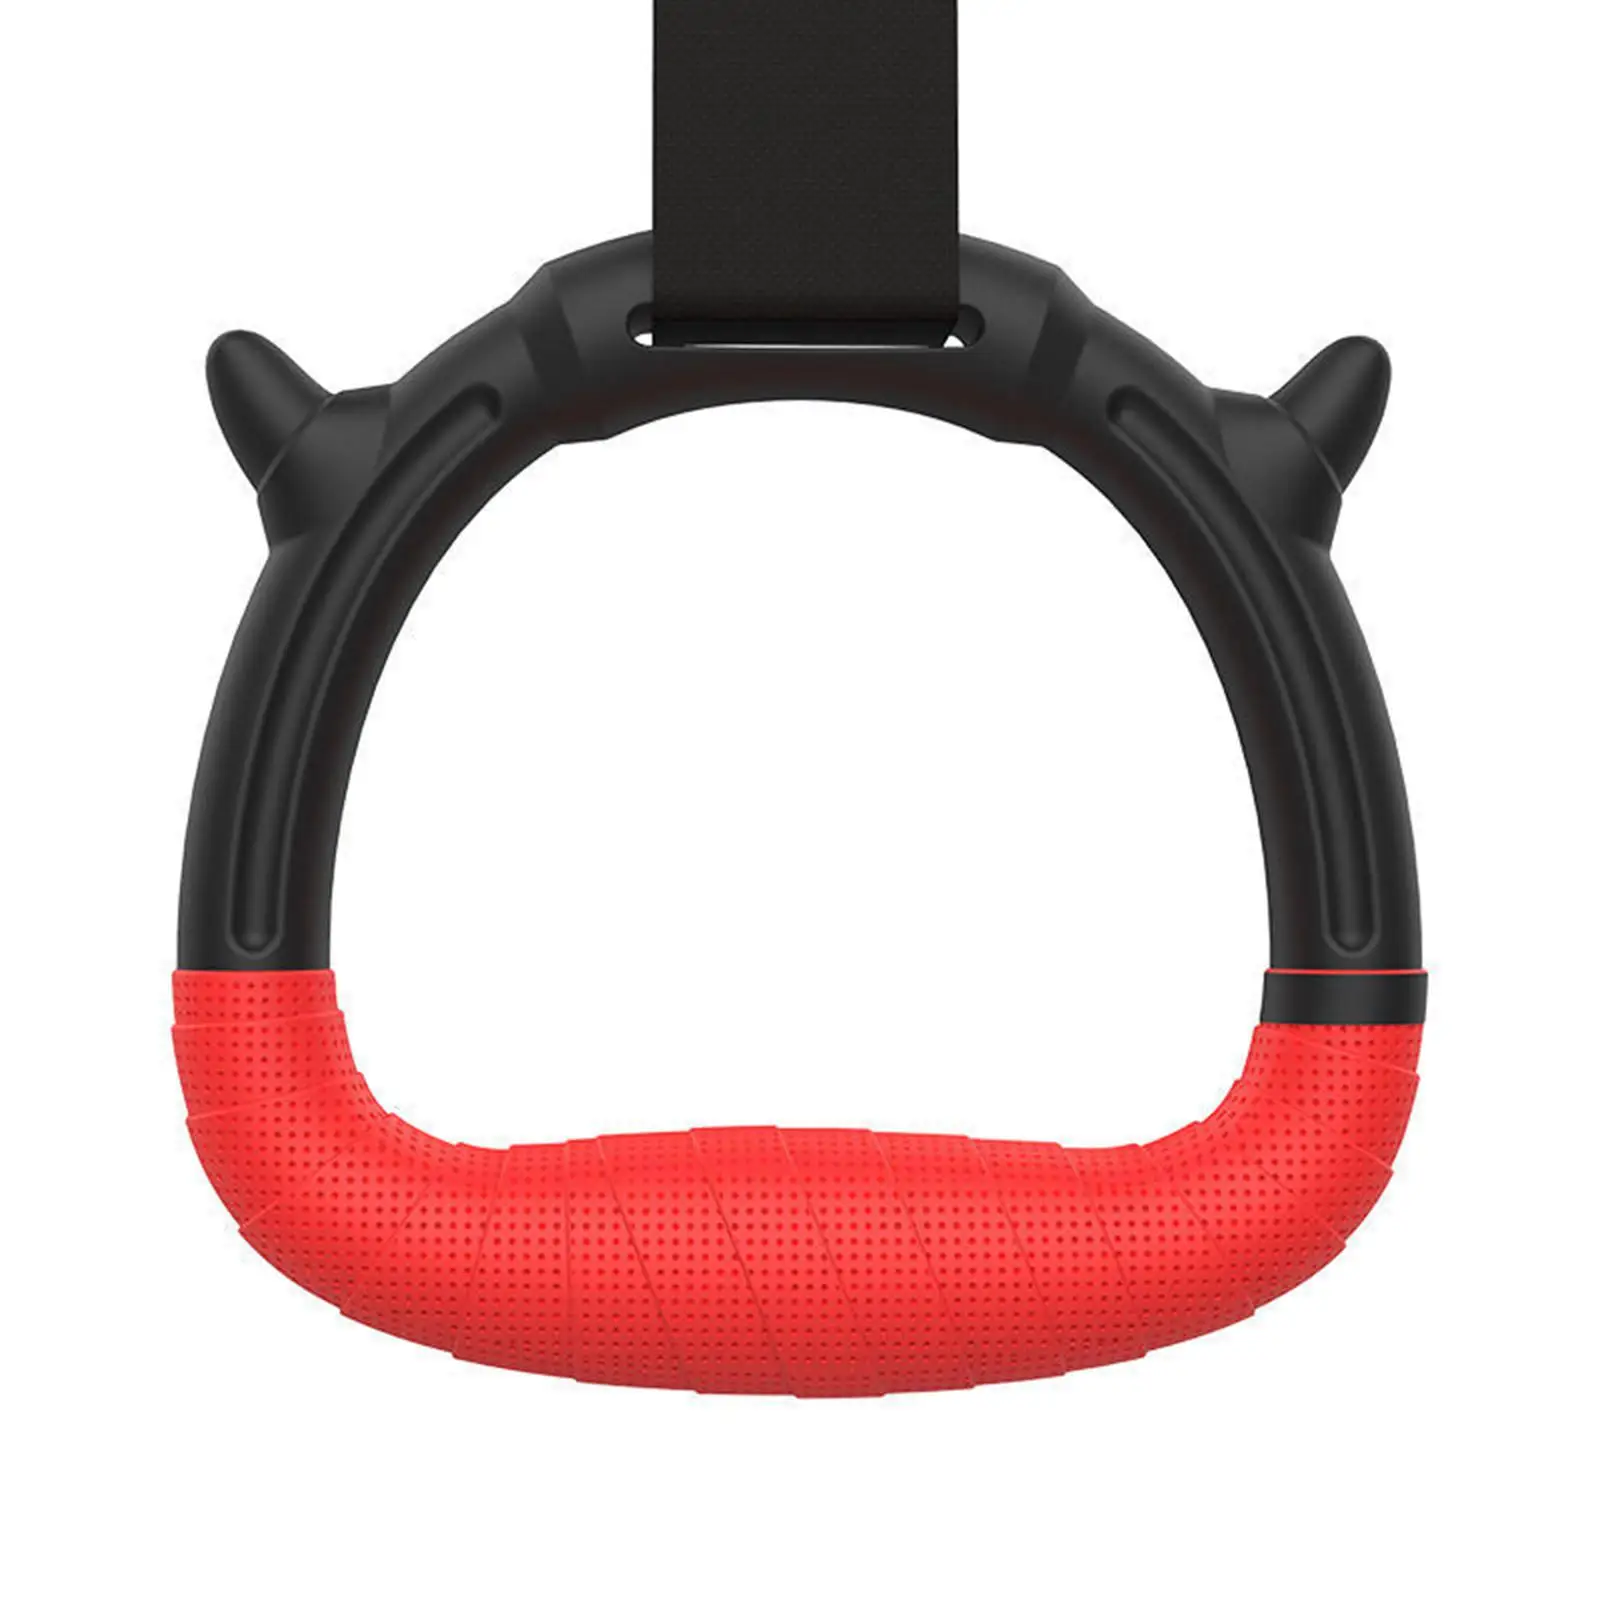 Gymnastics Rings Pull up Exercise Rings Training 300kg Capacity Fitness Equipment for Beginners Full Body Workout Children Adult